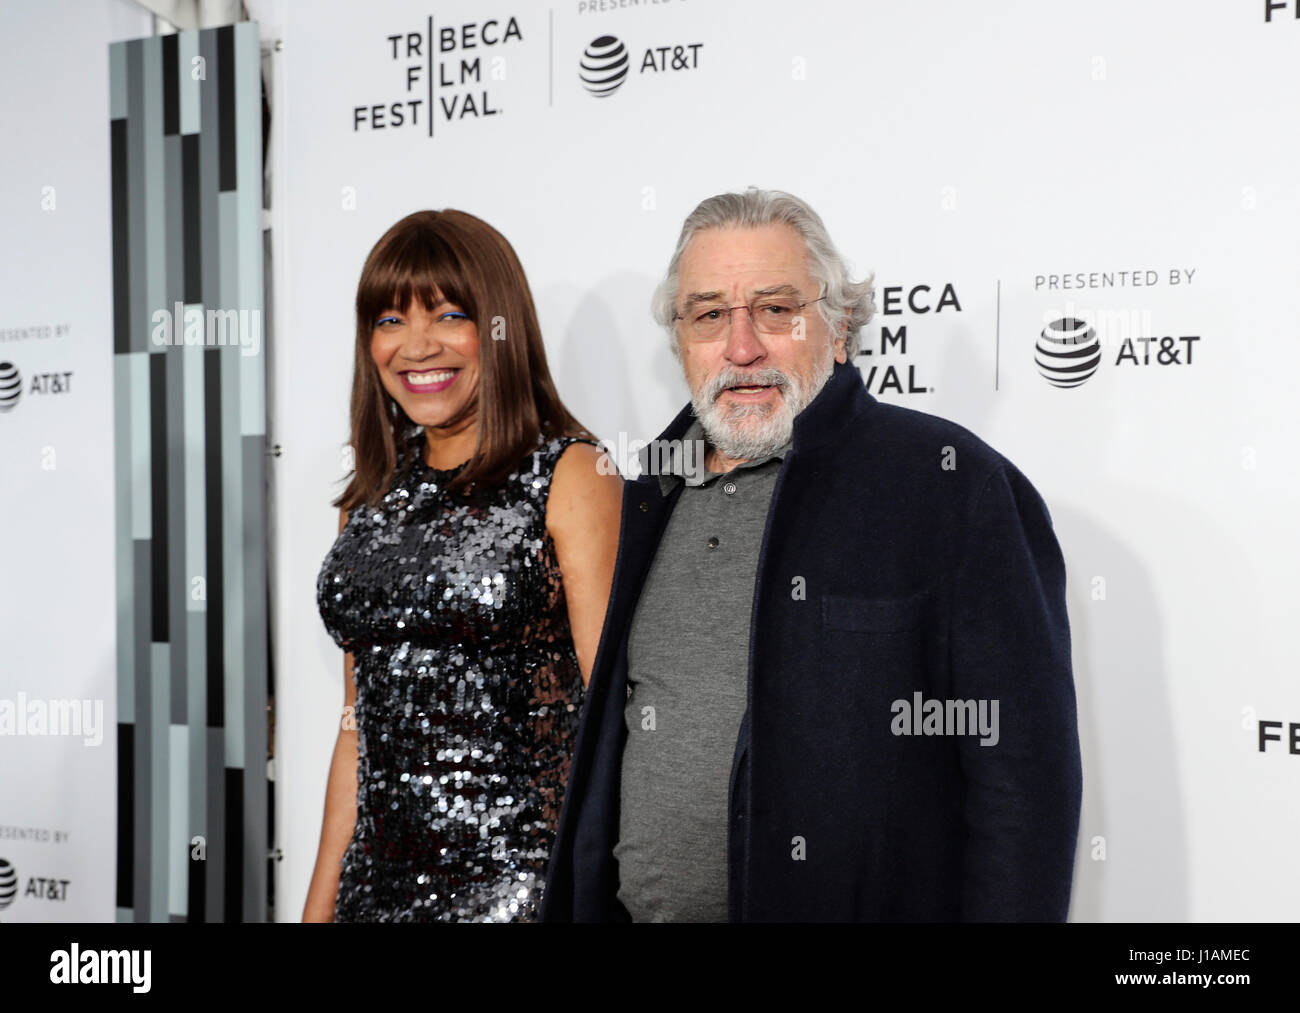 New York, USA. 19th Apr, 2017. Actor Robert De Niro and his wife Grace Hightower attend the opening night of the 2017 Tribeca Film Festival and the world premiere of 'Clive Davis: The Soundtrack of Our Lives' in New York, the United States, April 19, 2017. The 16th annual Tribeca Film Festival opened here Wednesday night, bringing a trove of films, TV events, virtual reality installations and music pieces to New York. Credit: Wang Ying/Xinhua/Alamy Live News Stock Photo